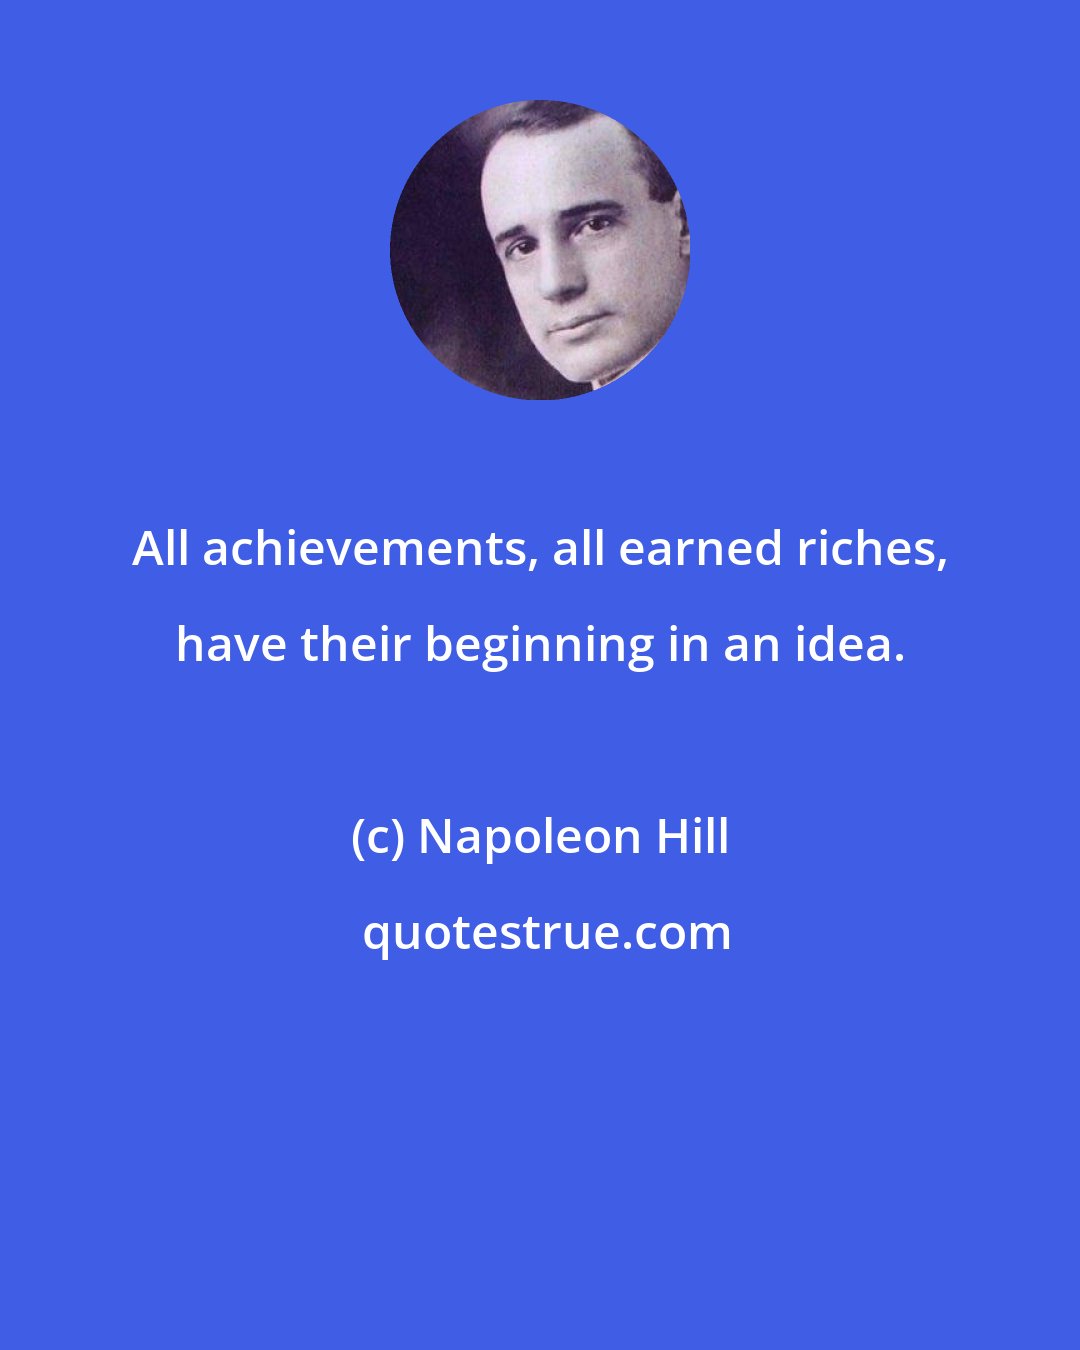 Napoleon Hill: All achievements, all earned riches, have their beginning in an idea.